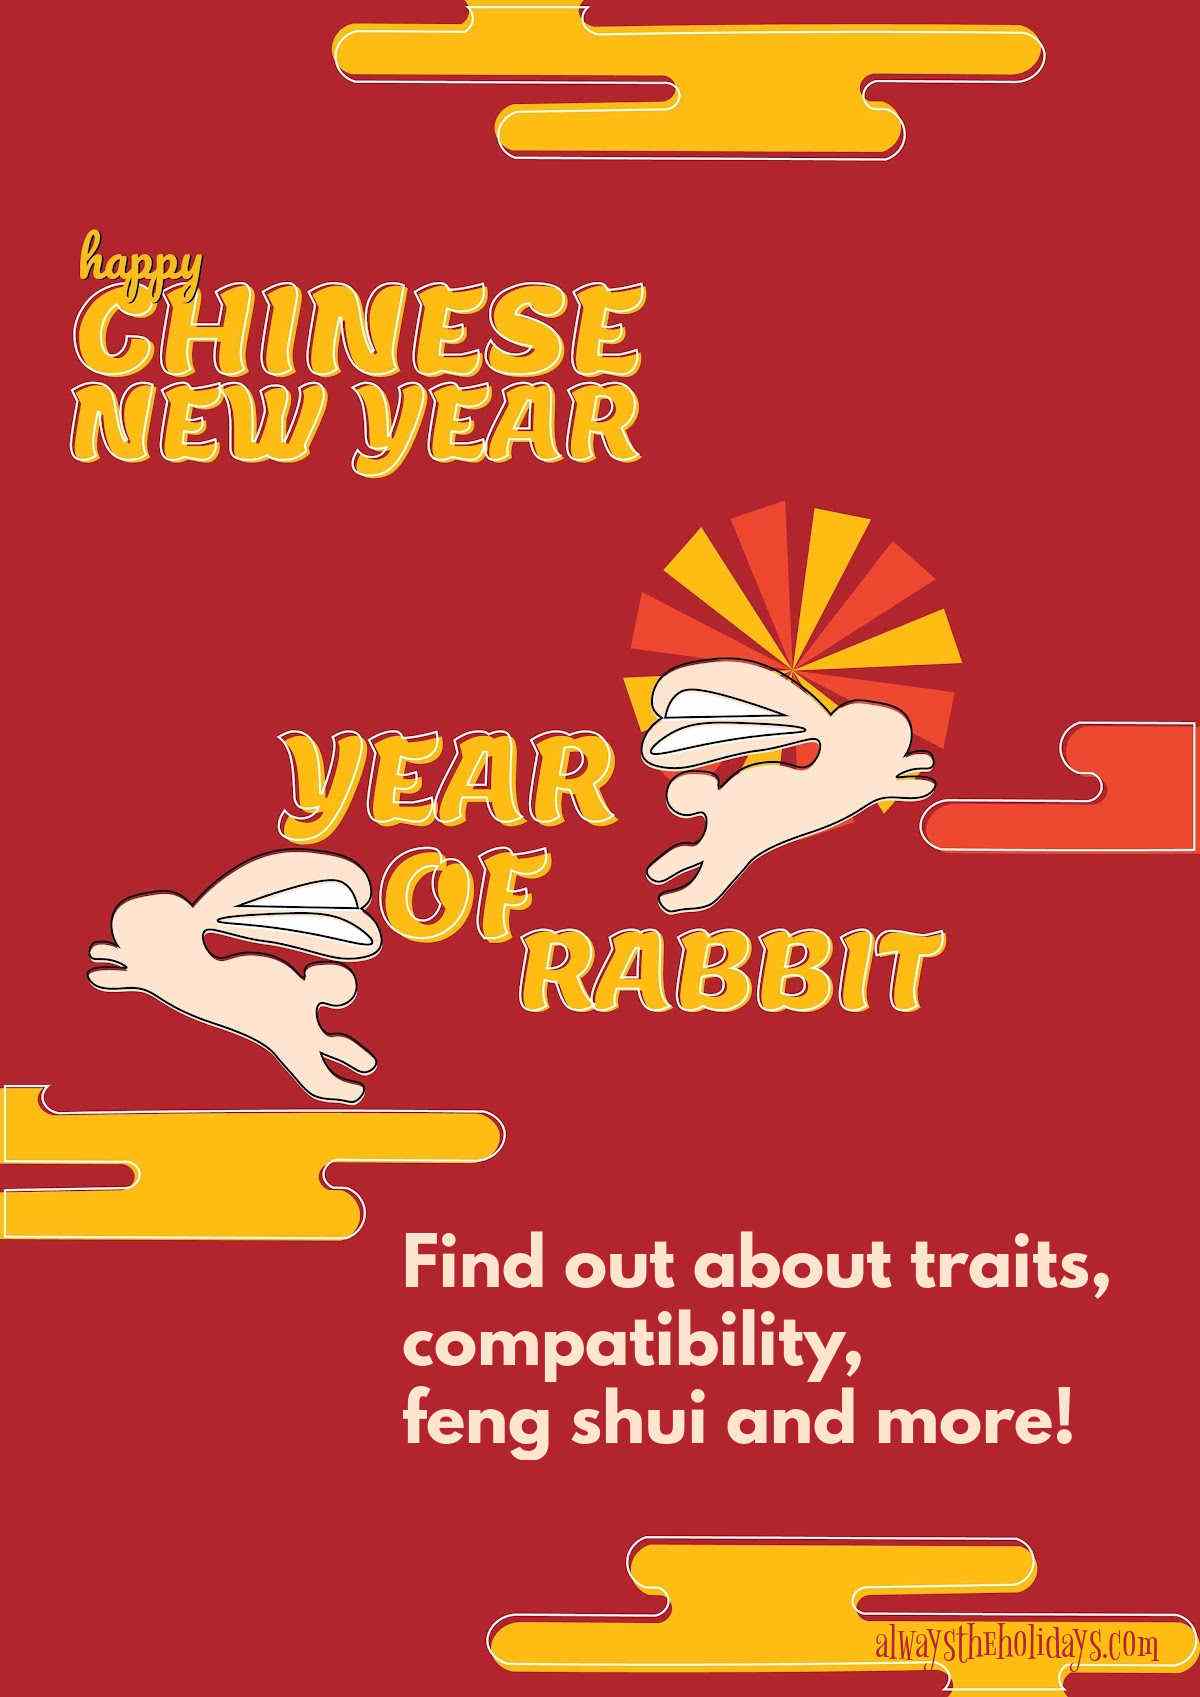 Rabbits jumping and words Happy Chinese New Year, Year of the Rabbit.